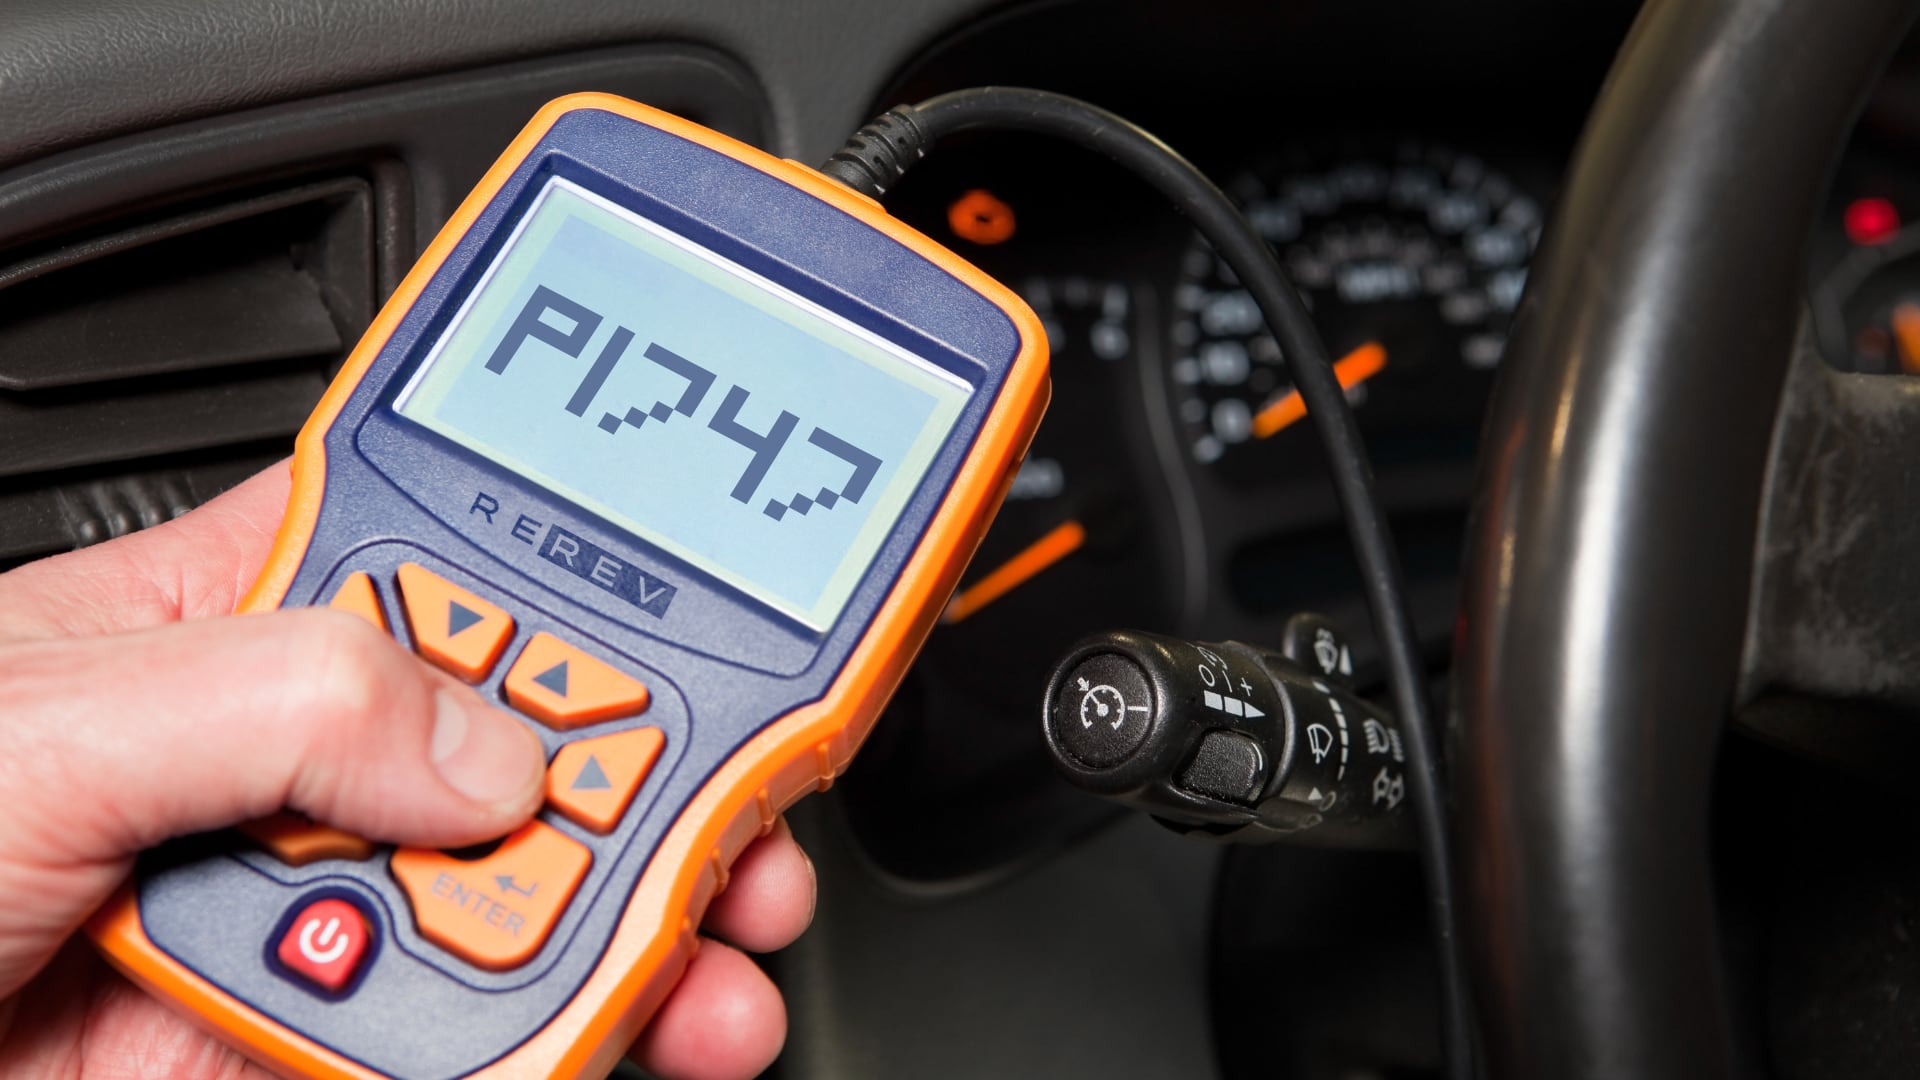 A person is holding a car diagnostic tool.